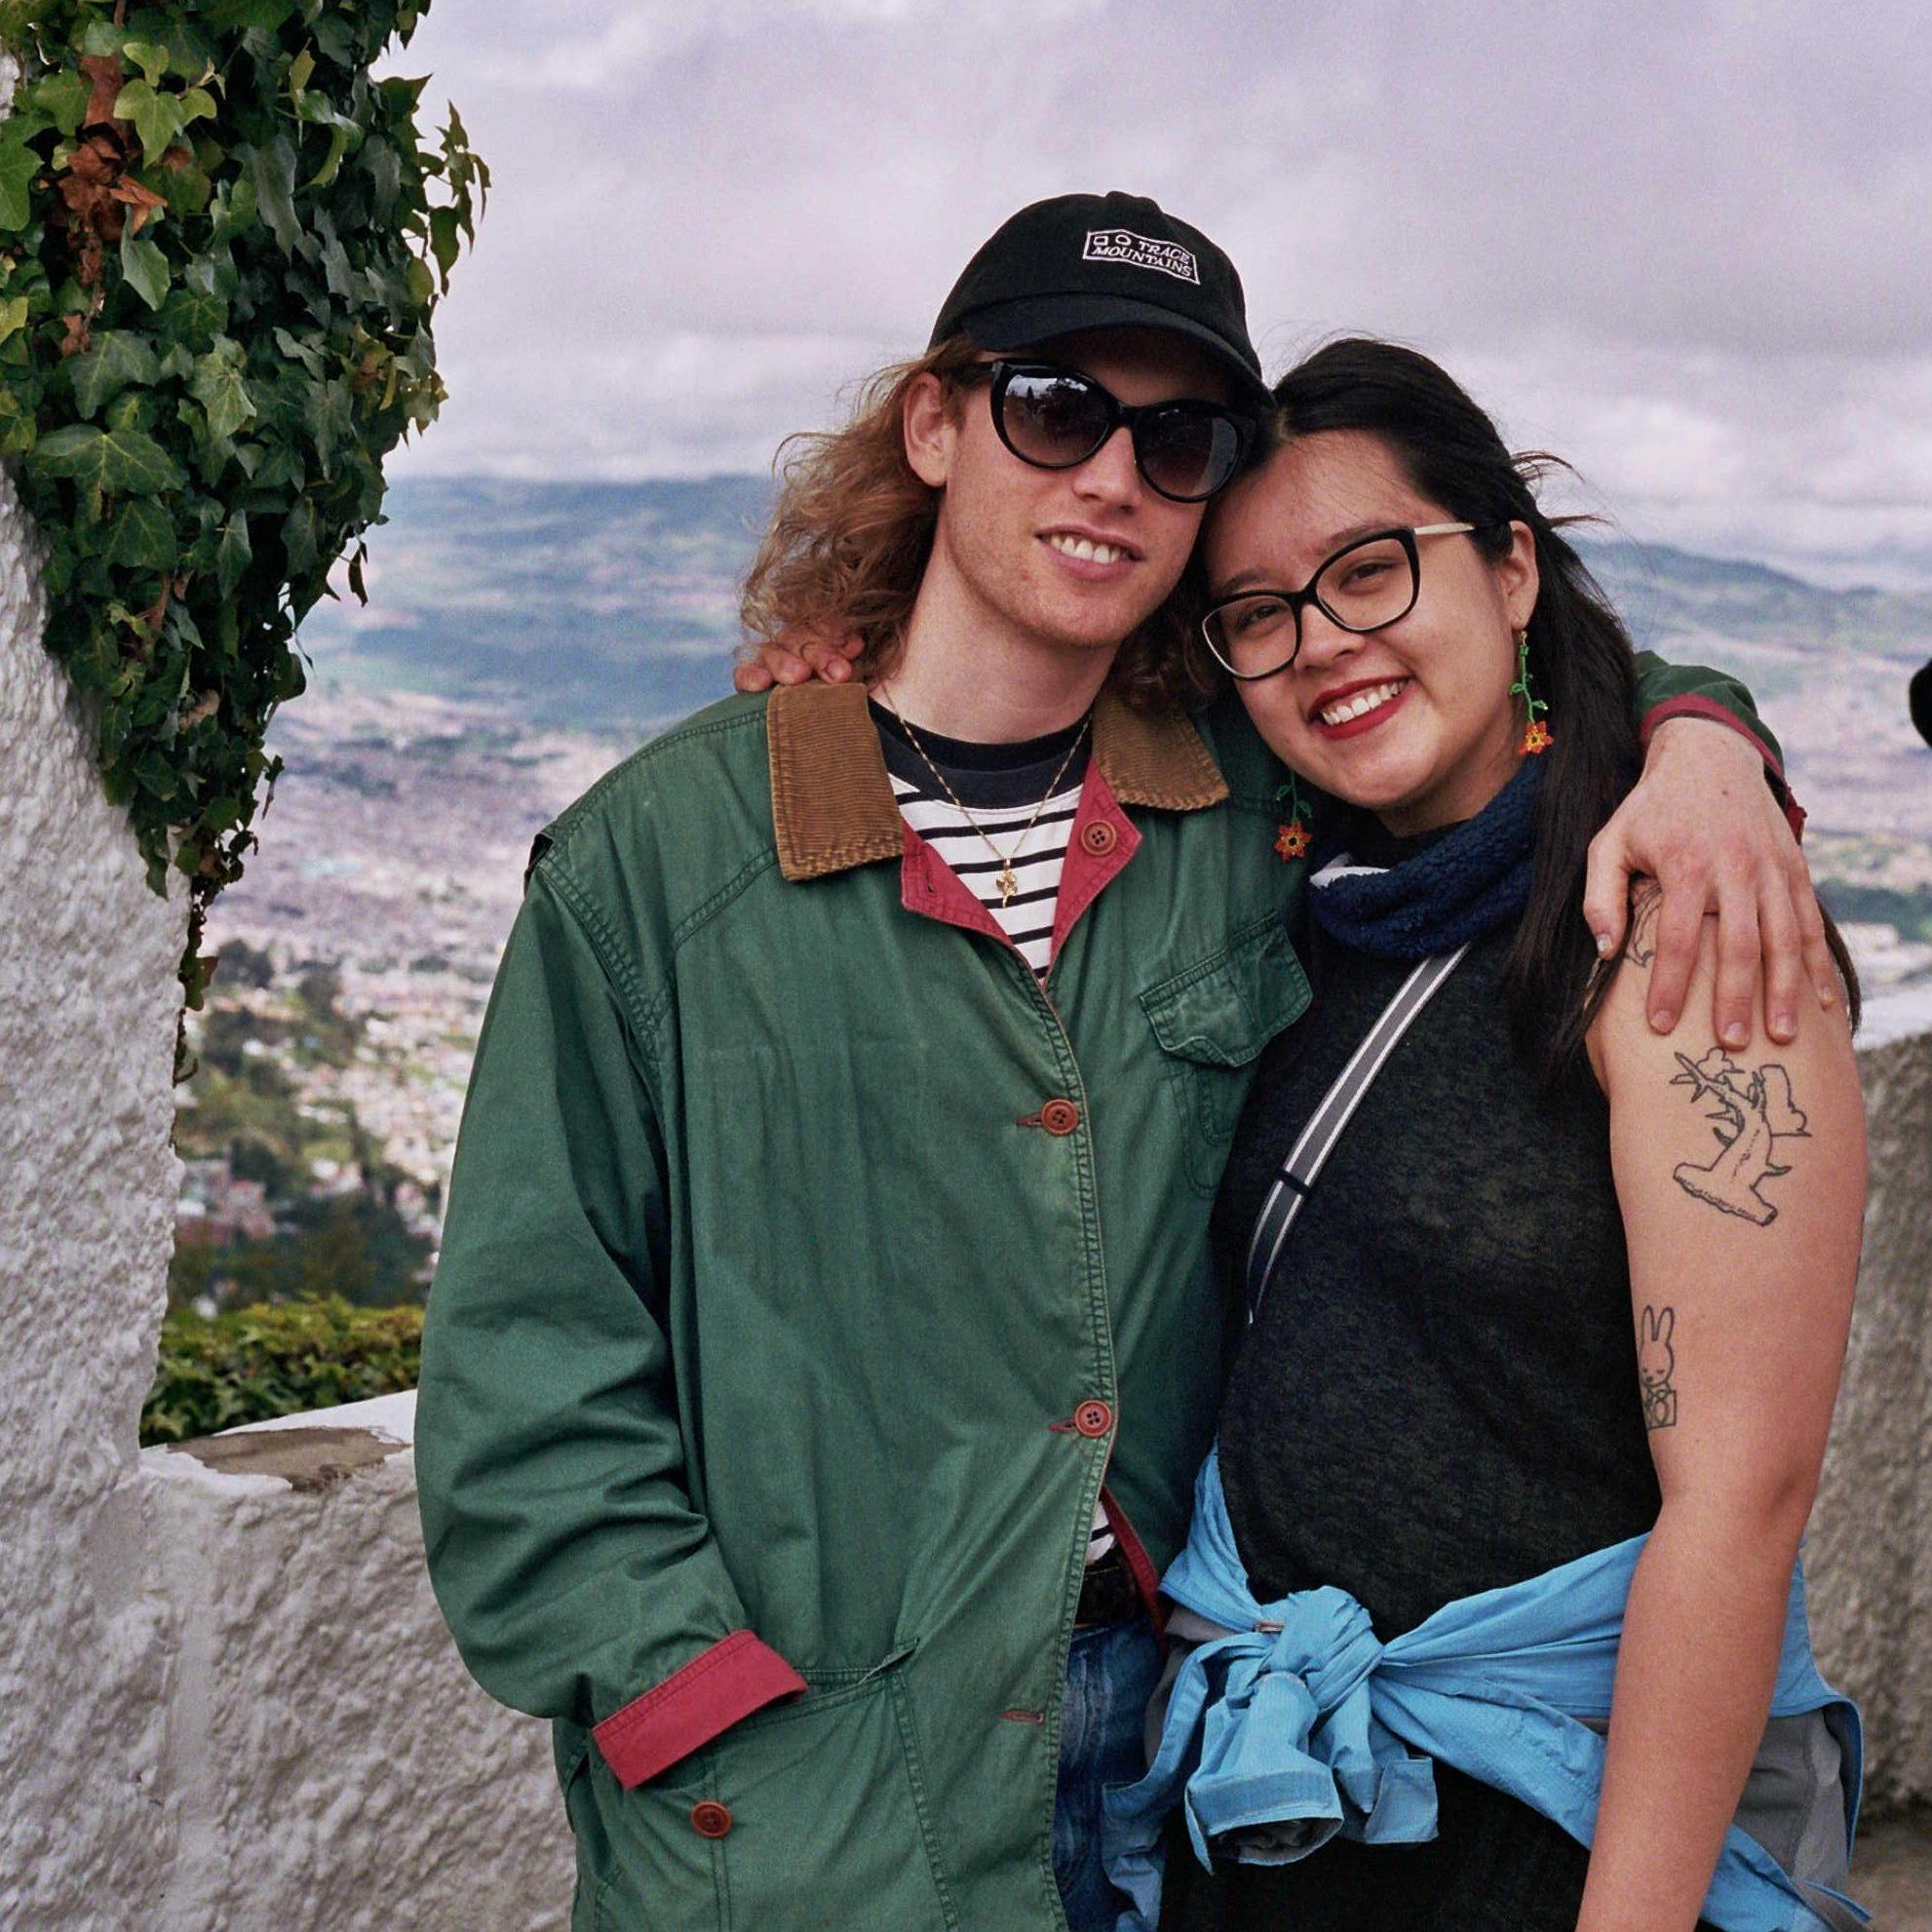 On top of Monserrate in Bogota, Colombia.